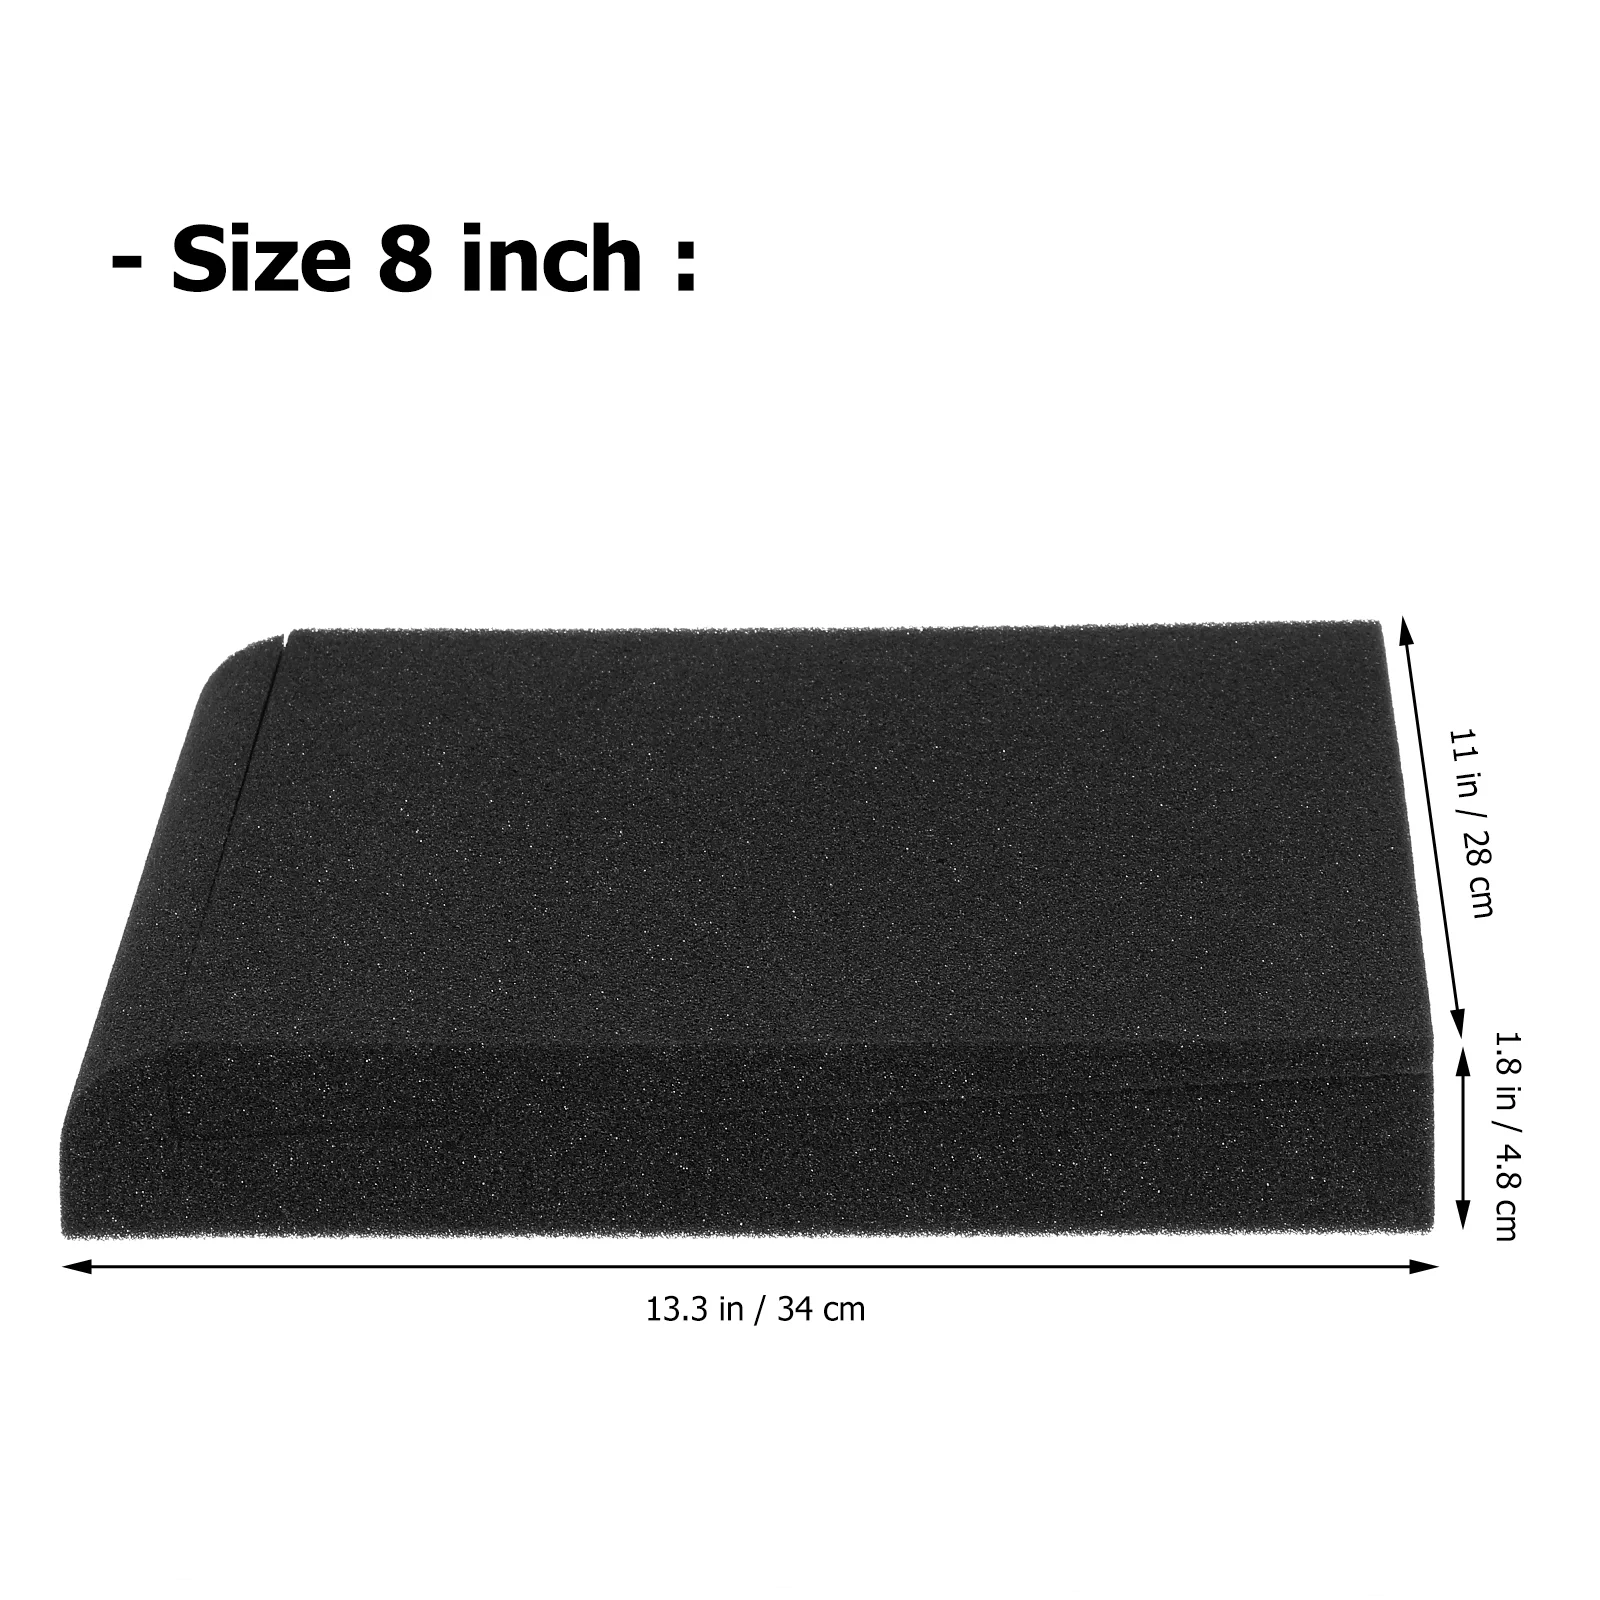 

Cushion Small Foams Pad Speaker Isolation Gadget Mat for Tool Parts Supply Accessory Desktop